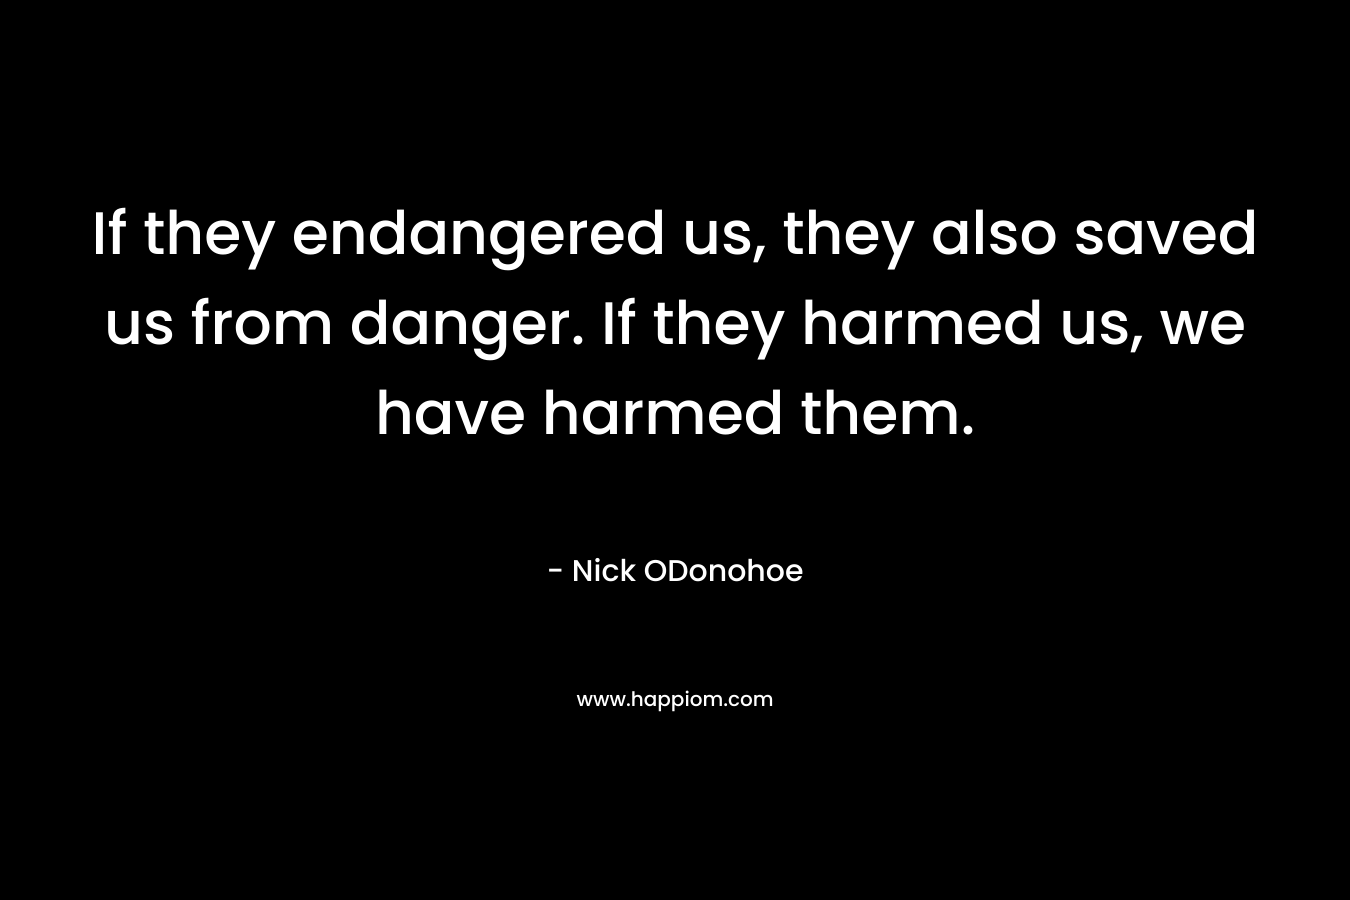 If they endangered us, they also saved us from danger. If they harmed us, we have harmed them.